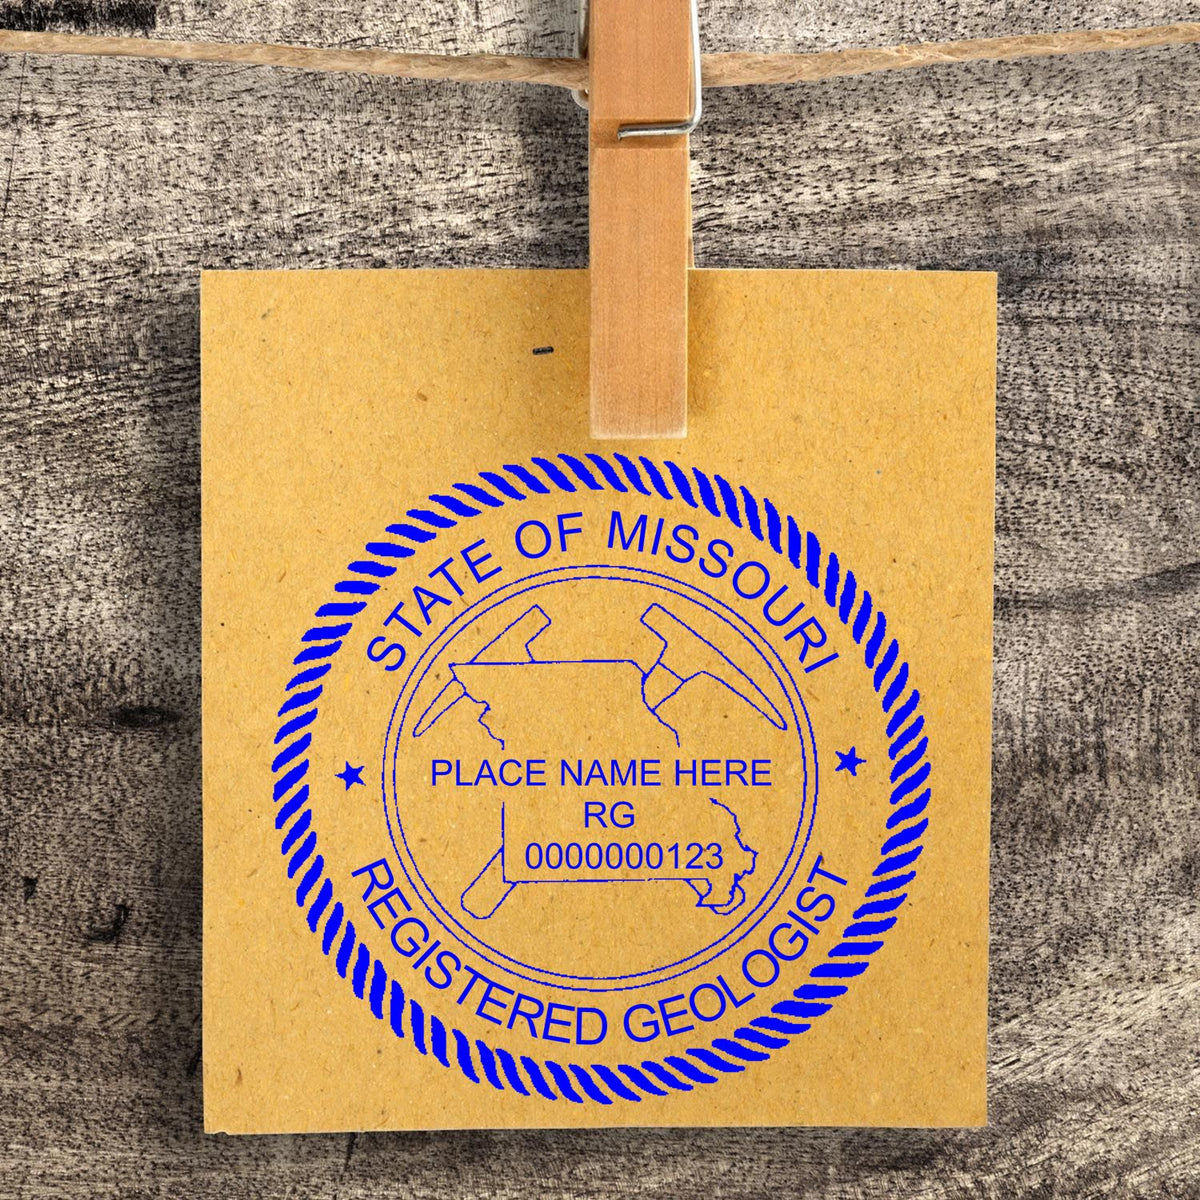 The Slim Pre-Inked Missouri Professional Geologist Seal Stamp stamp impression comes to life with a crisp, detailed image stamped on paper - showcasing true professional quality.